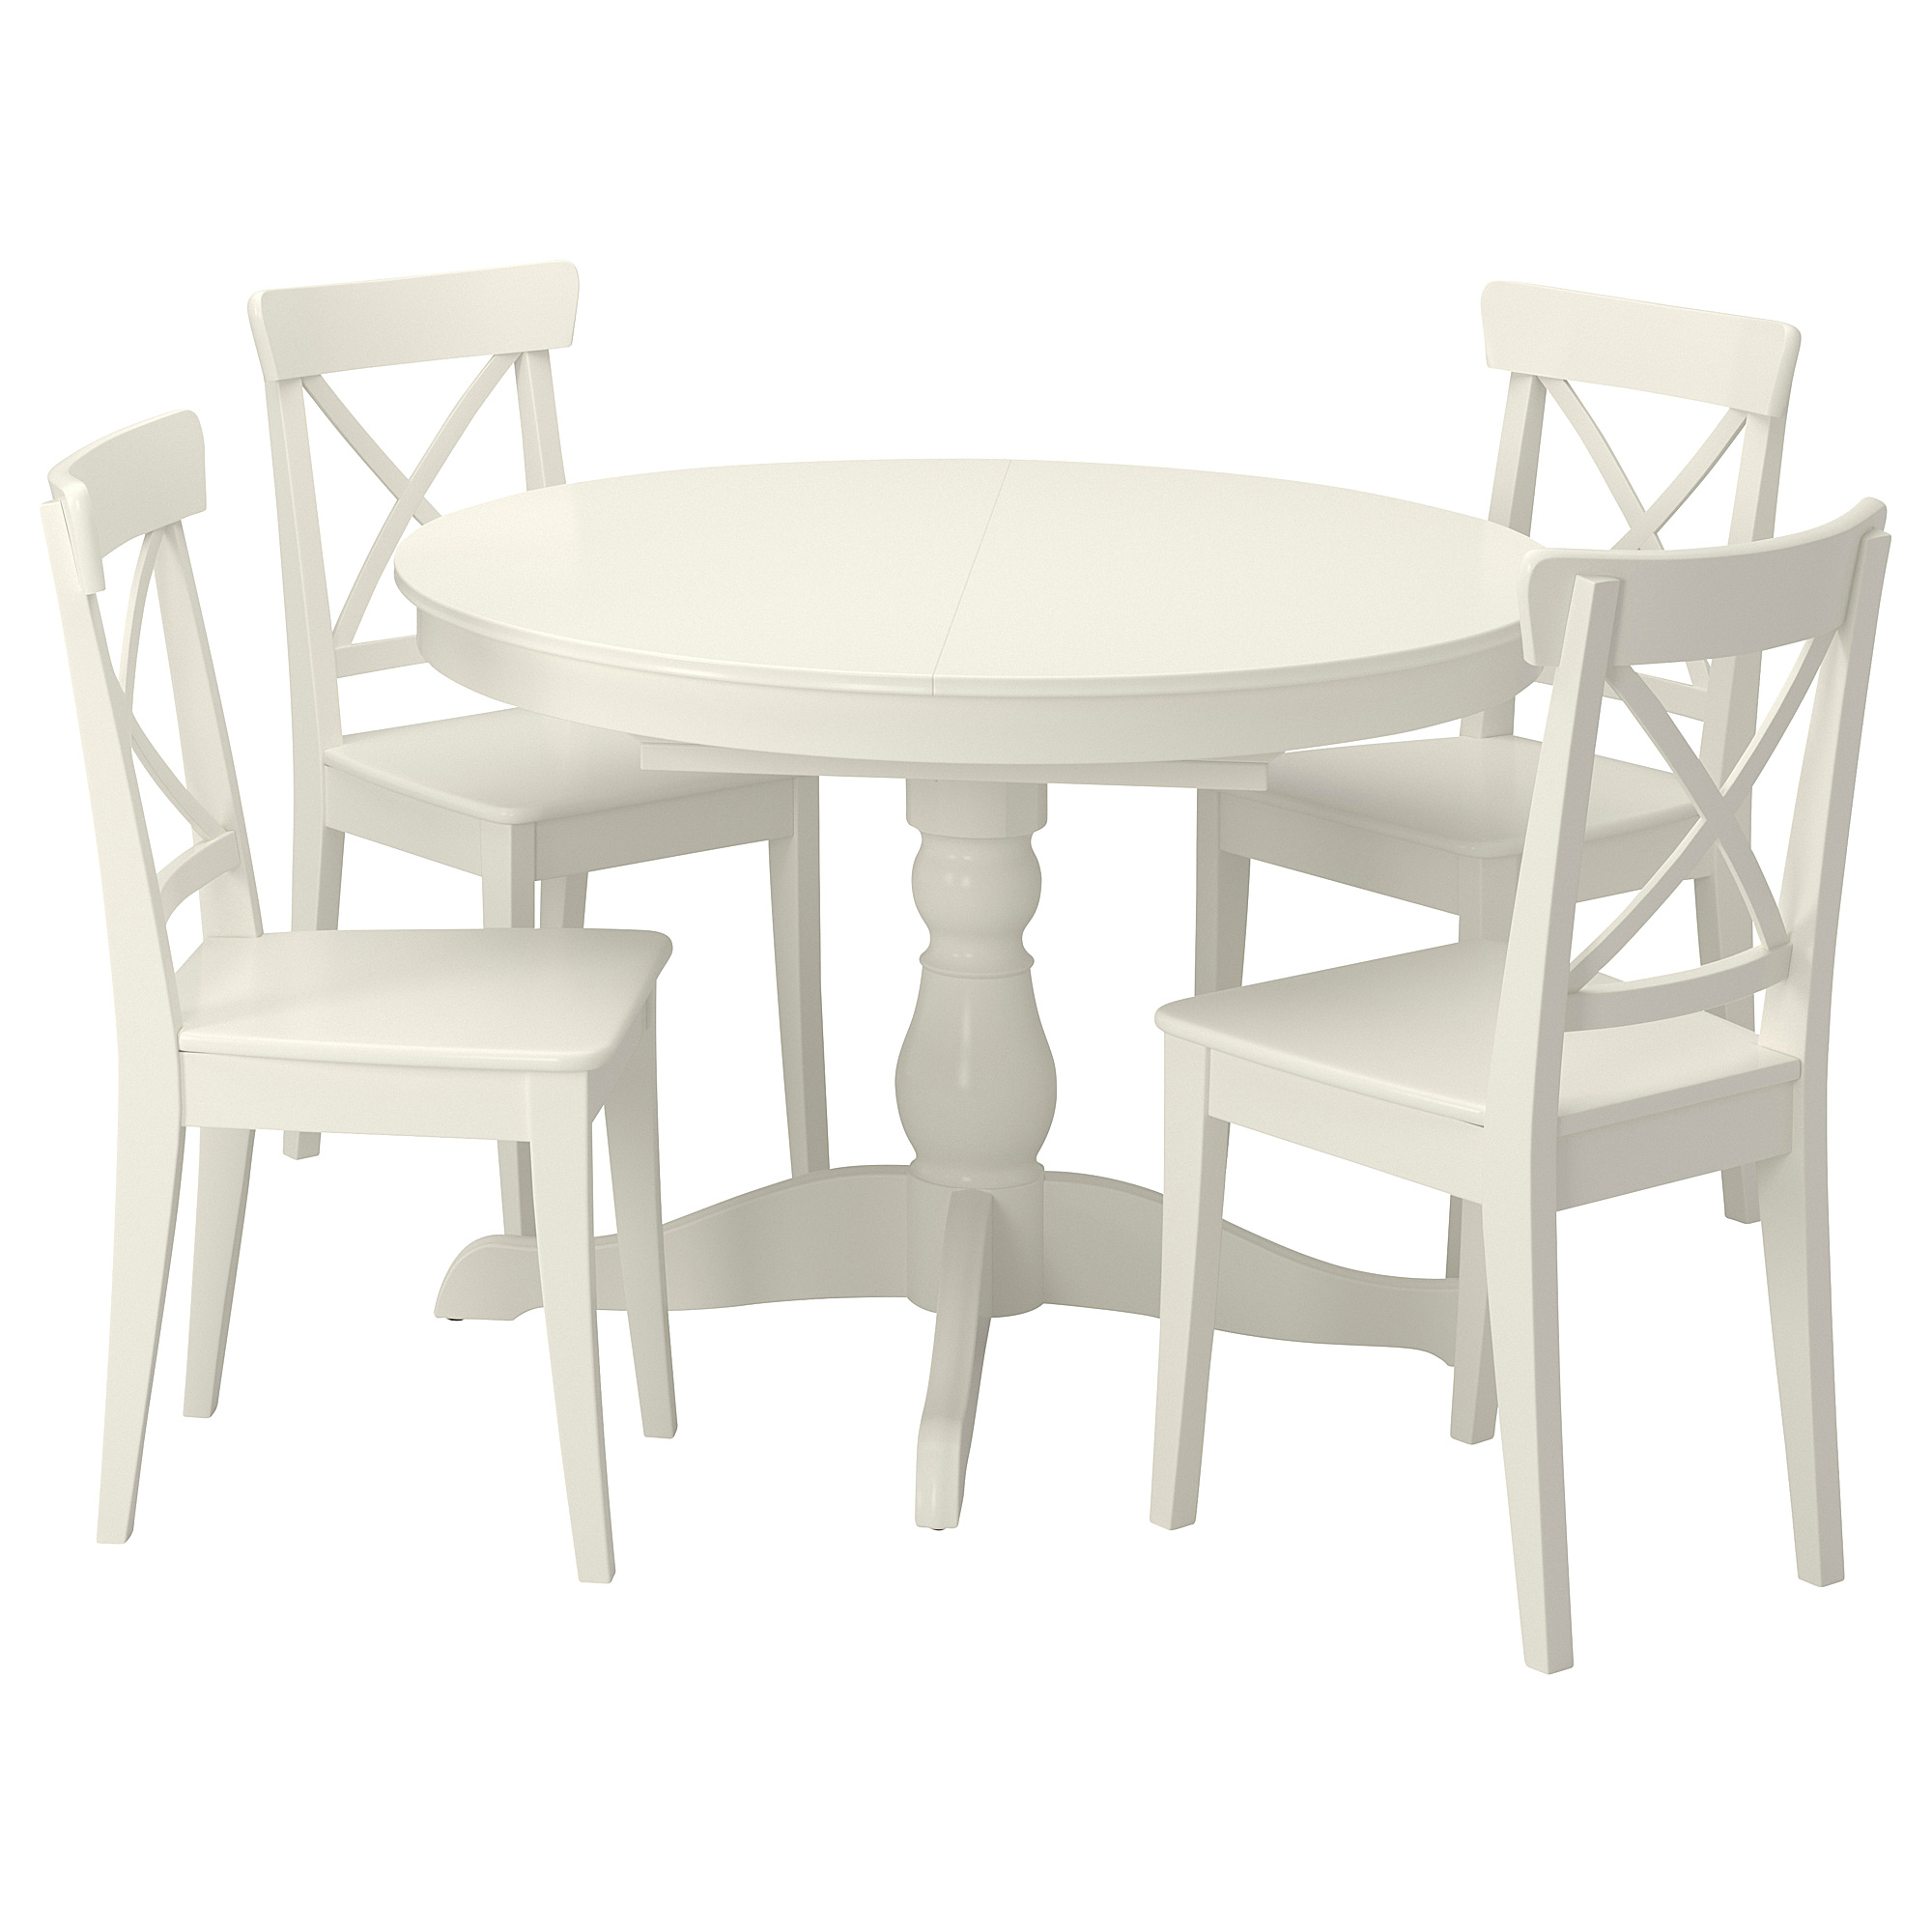 INGATORP/INGOLF table and 4 chairs